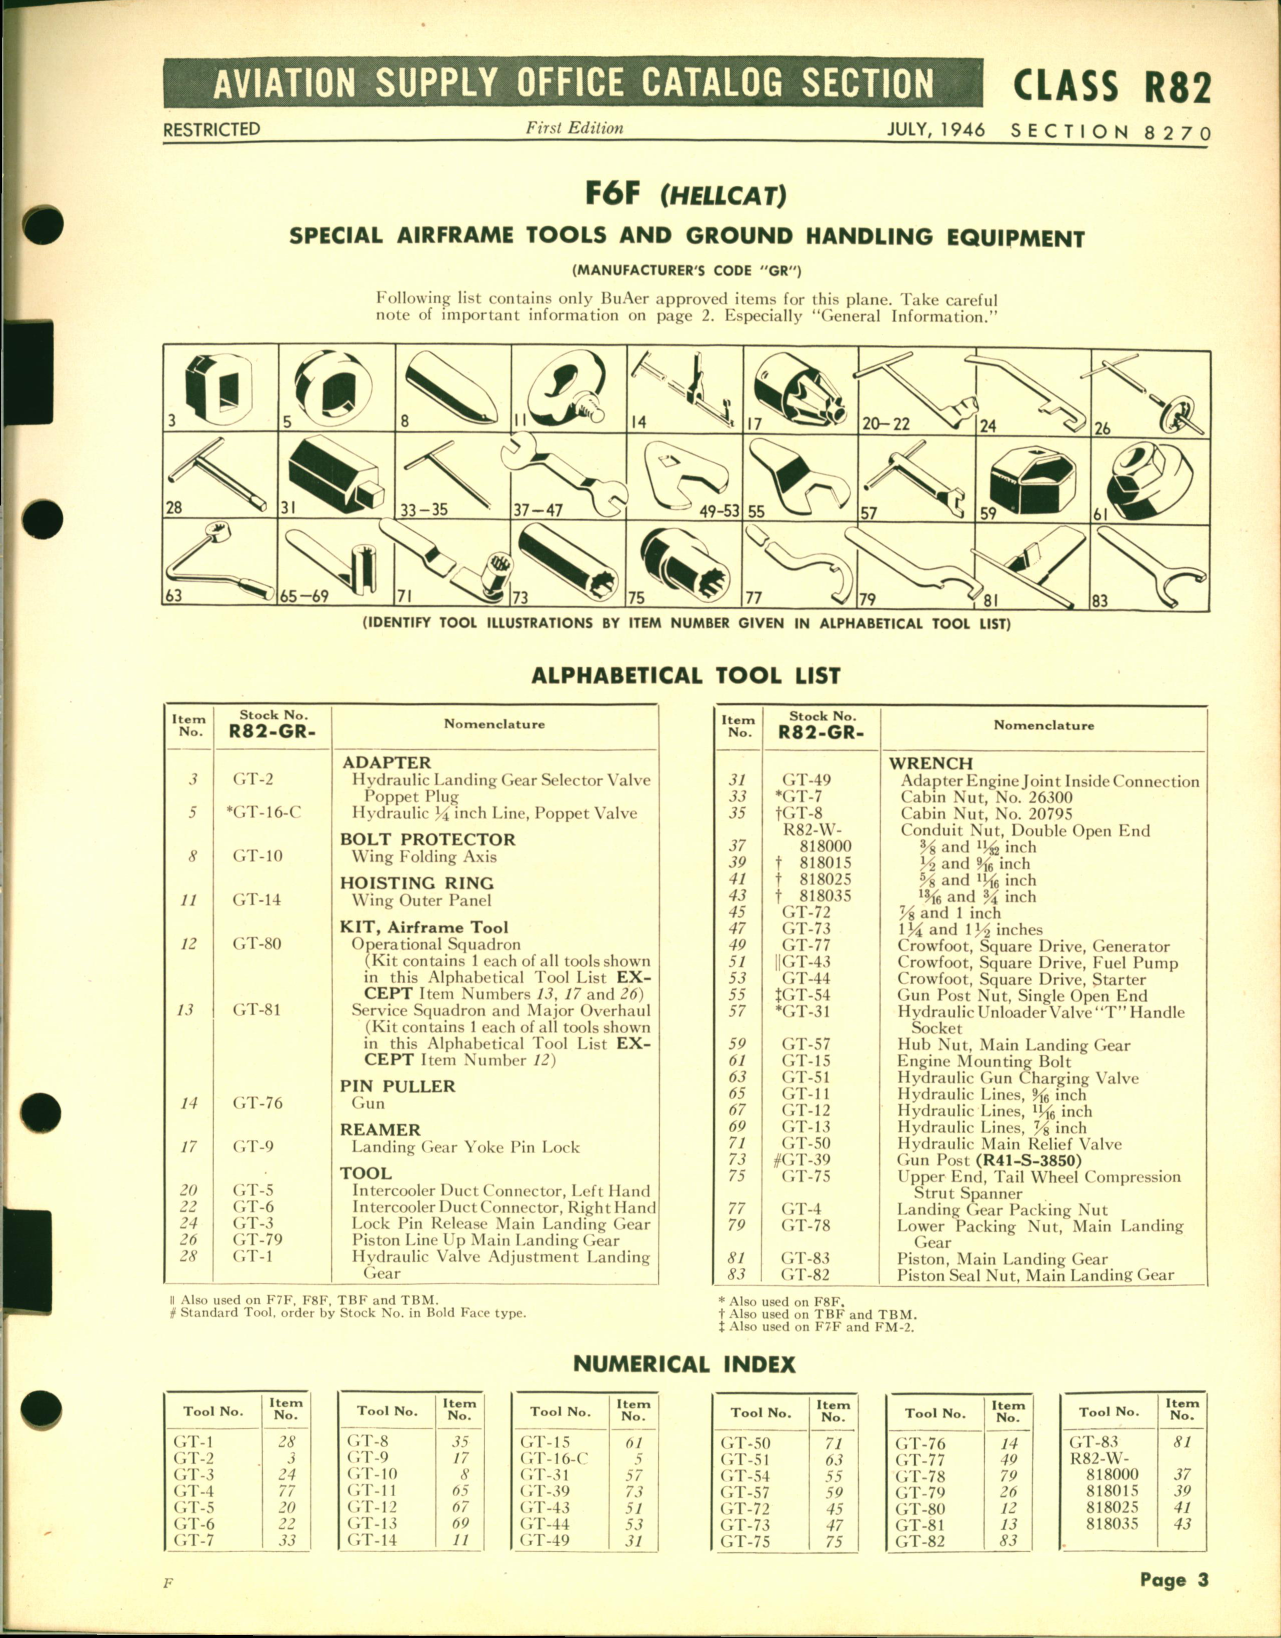 Sample page 3 from AirCorps Library document: Special Airframe tools and Ground Handling Equipment